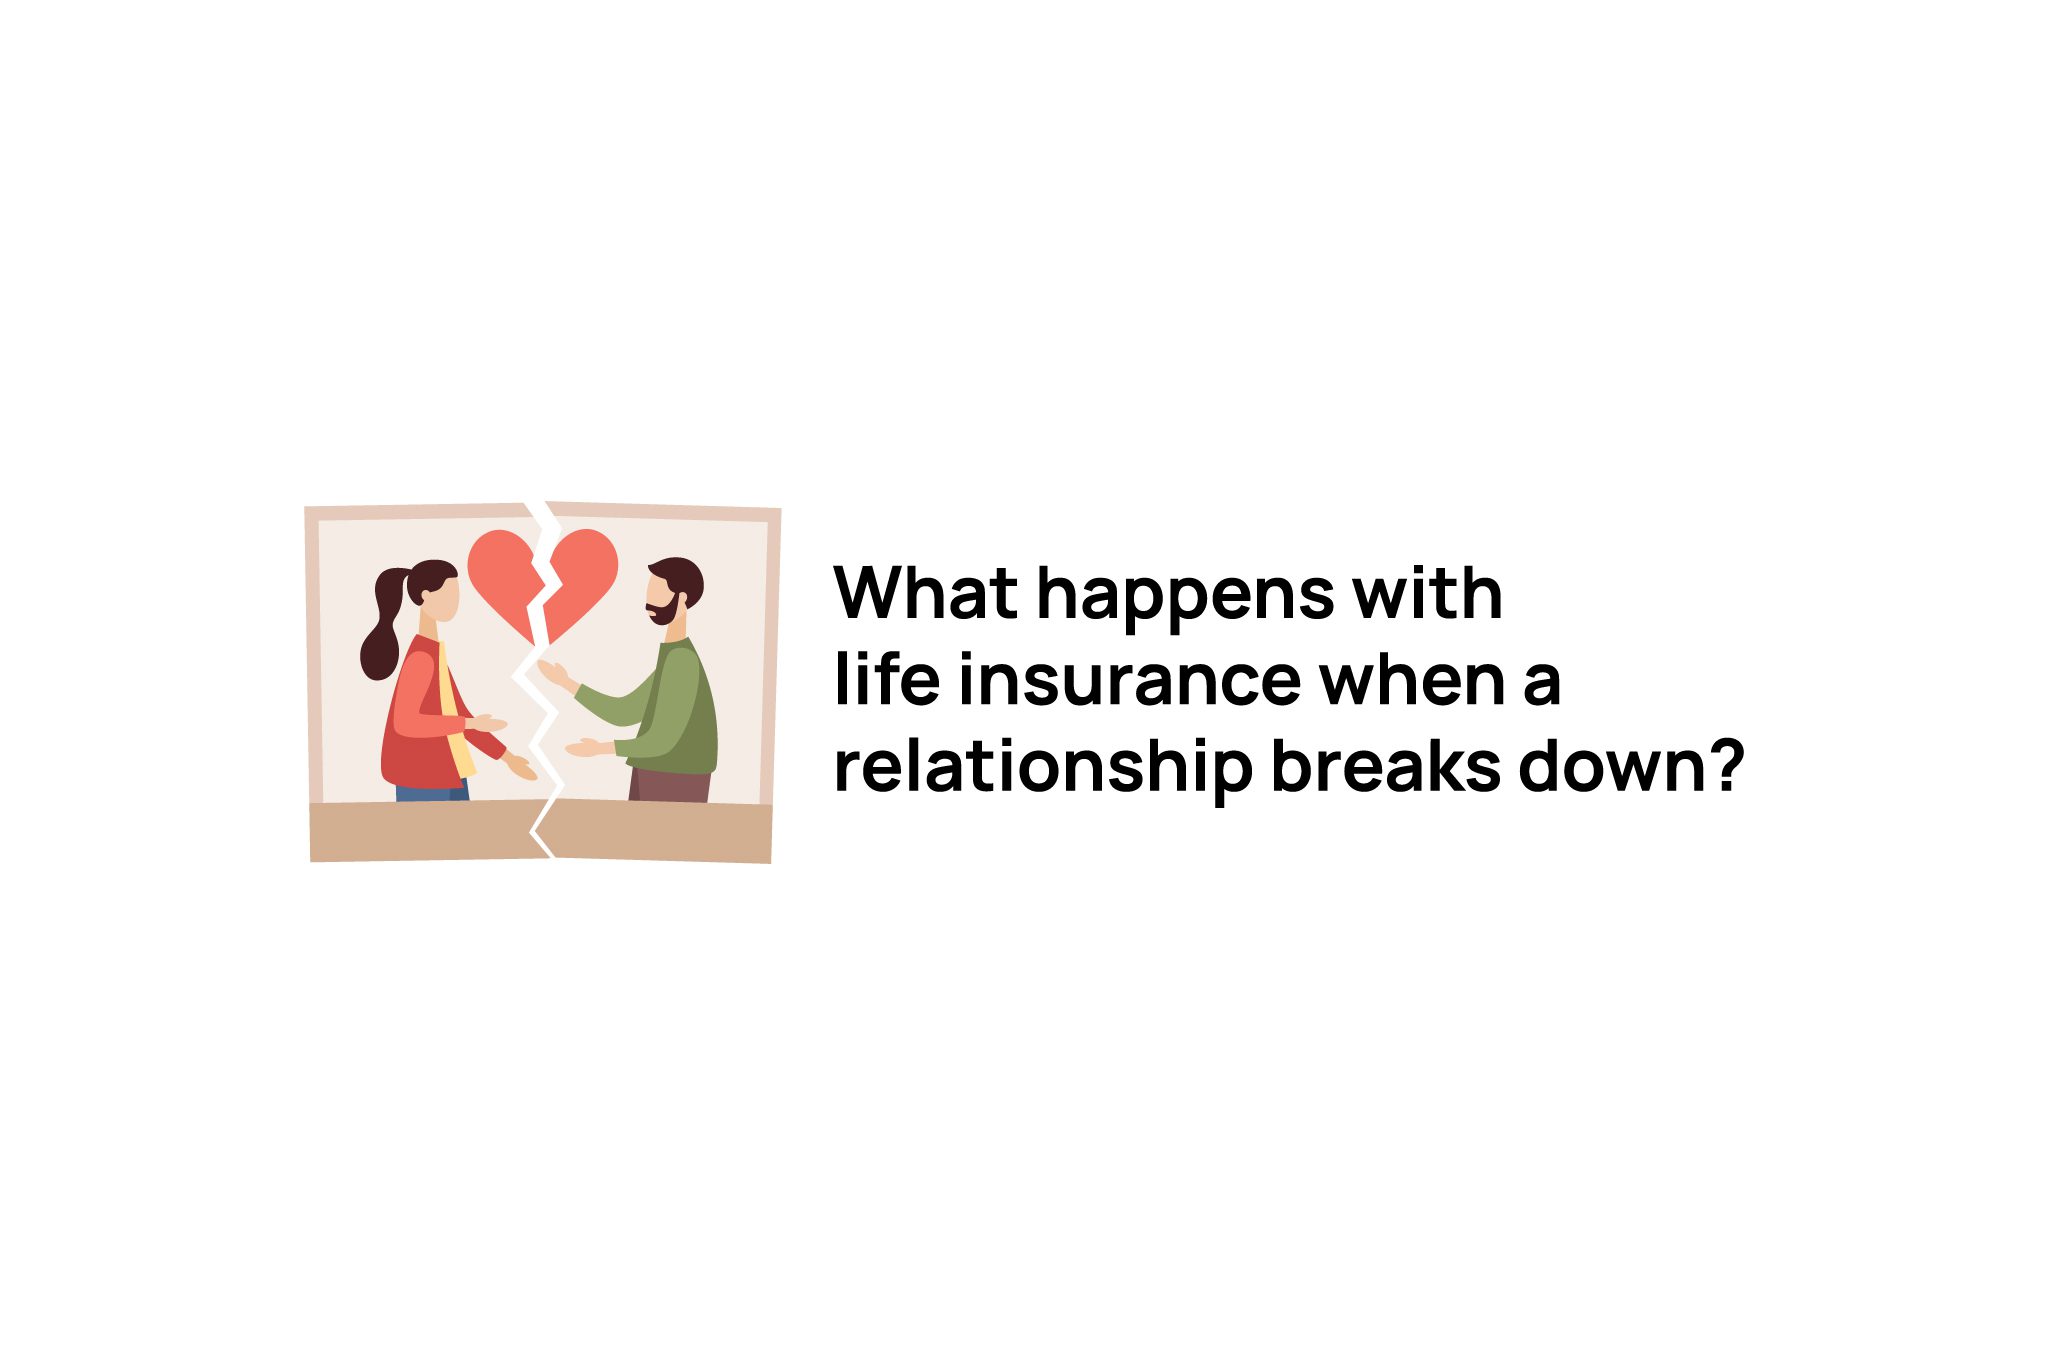 What happens with life insurance when a relationship breaks down?